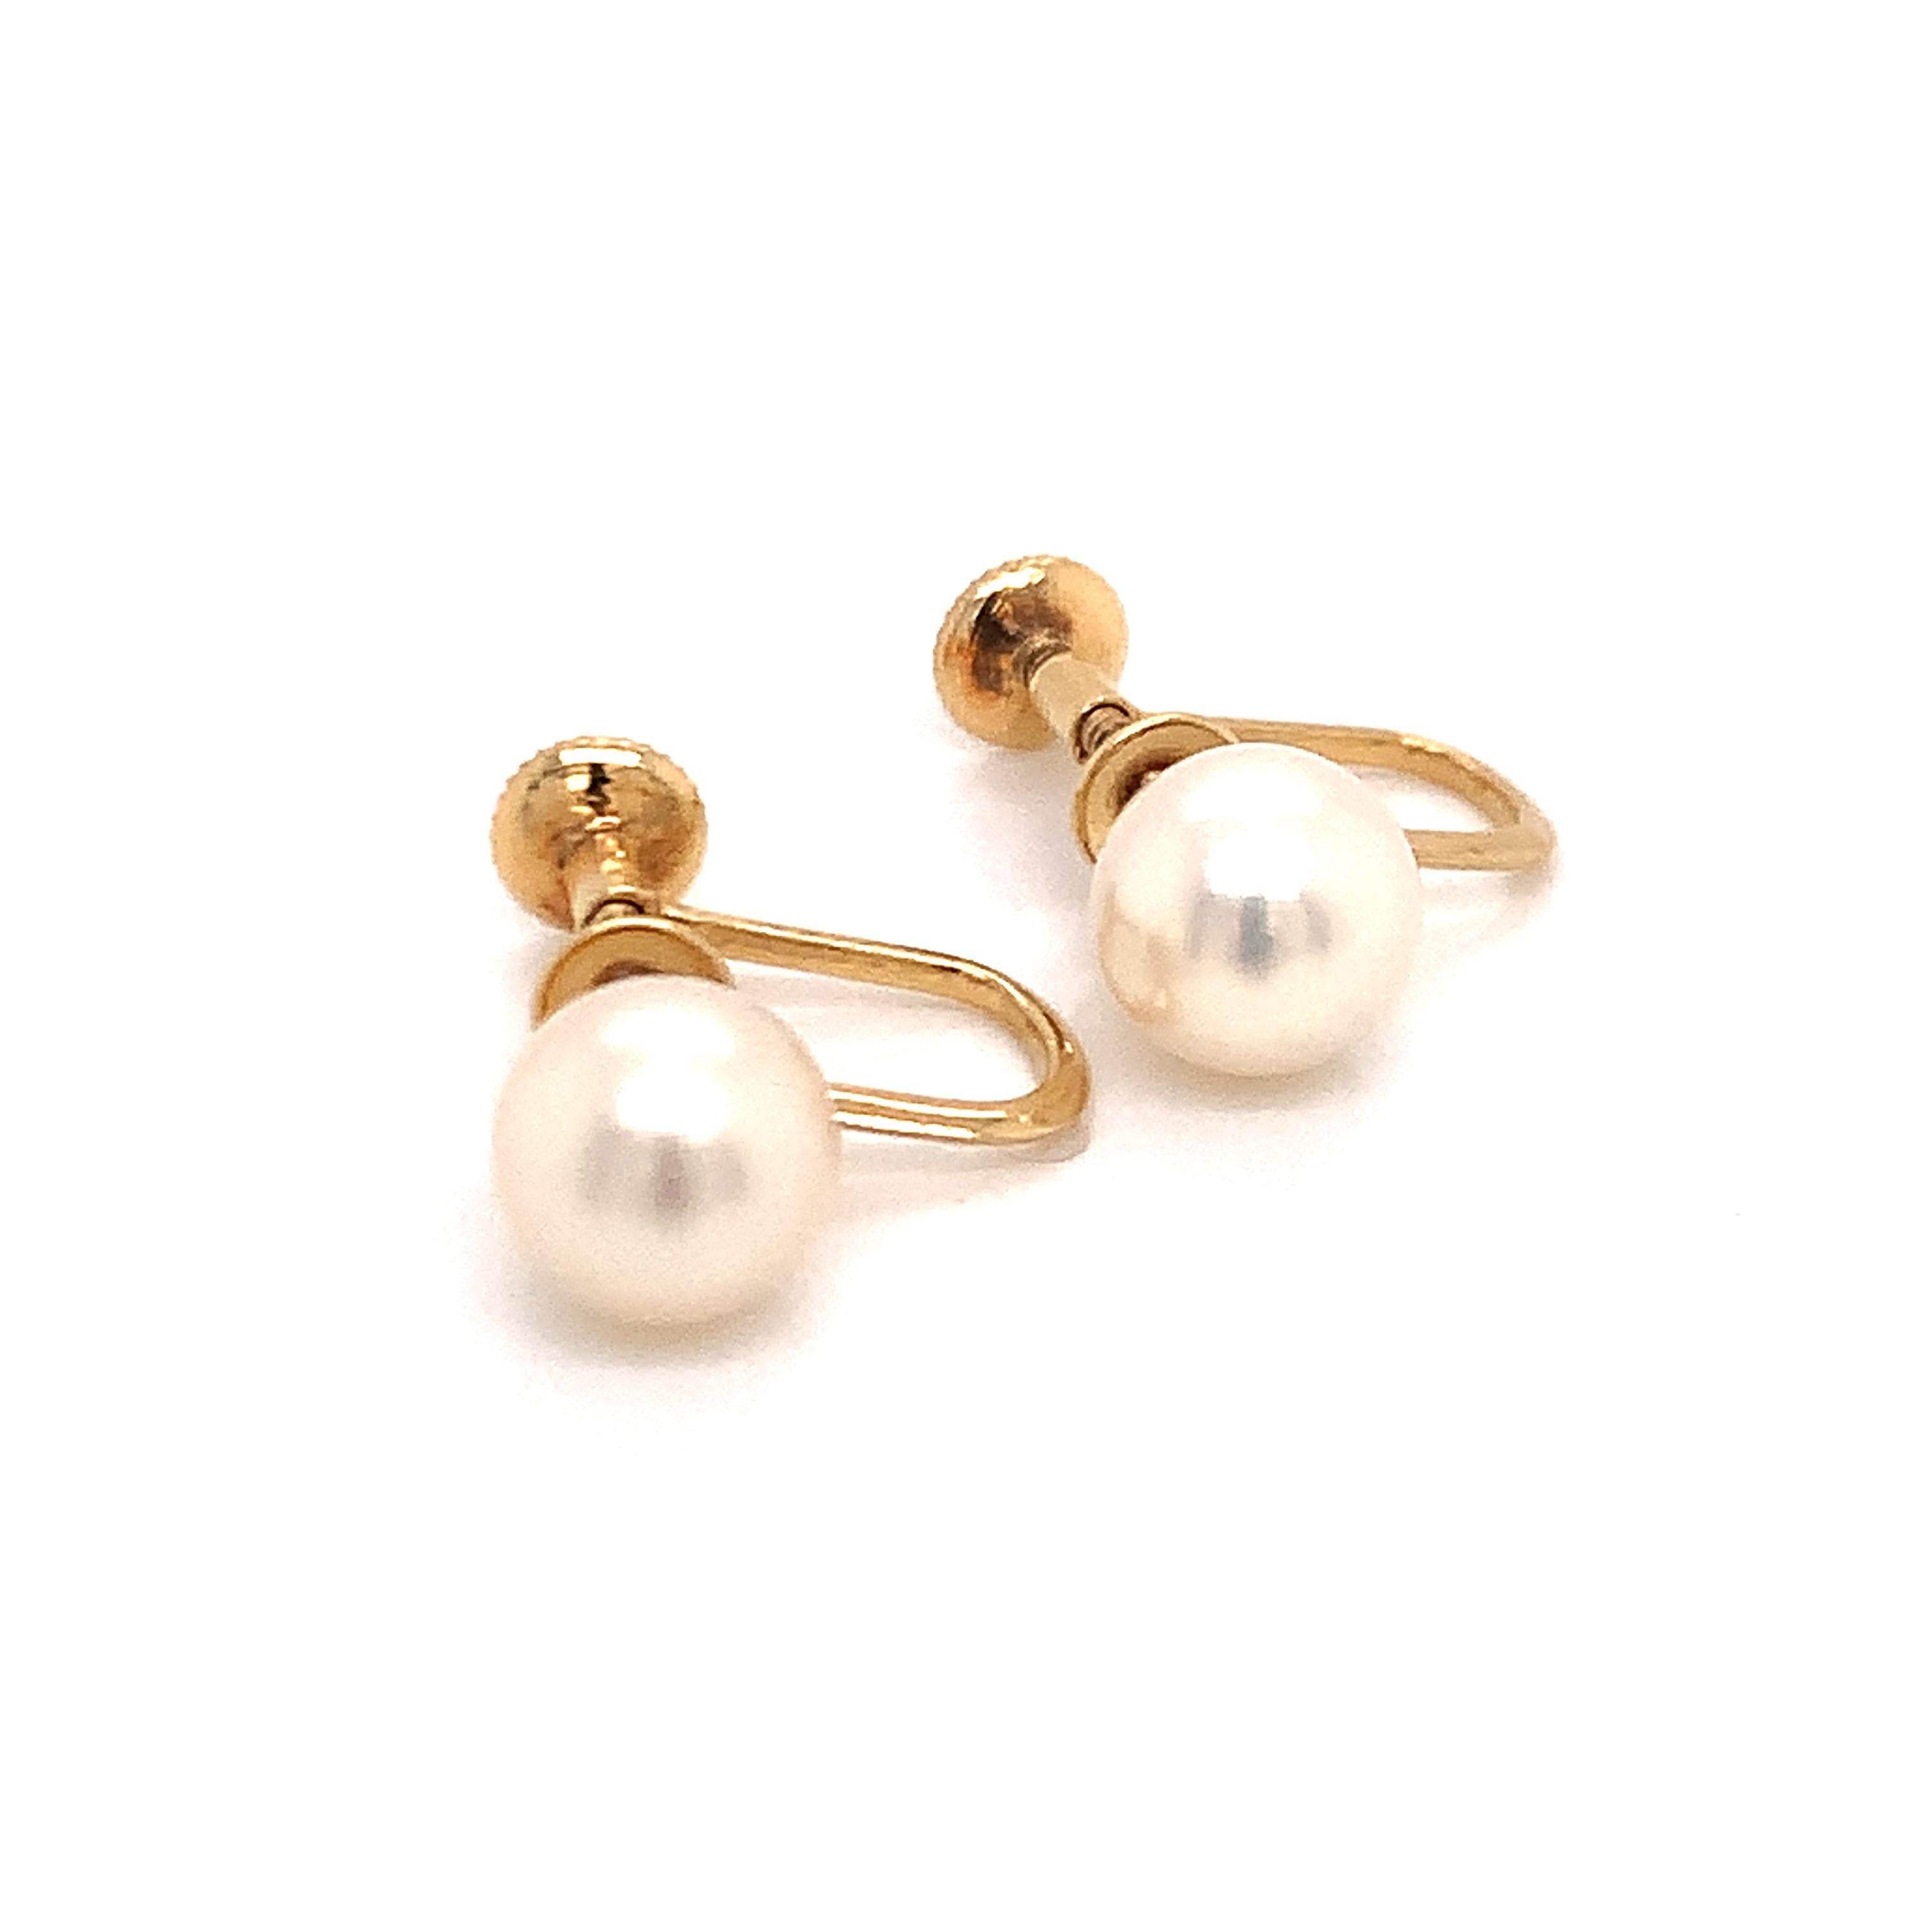 Mikimoto Estate Akoya Pearl Clip On Earrings 14k Yellow Gold 7.43 mm M175

These elegant Authentic Mikimoto Estate Akoya pearl clip-on earrings are made of 14 karats yellow gold and have 2 Akoya Cultured Pearls in size of 7.43 mm with a weight of